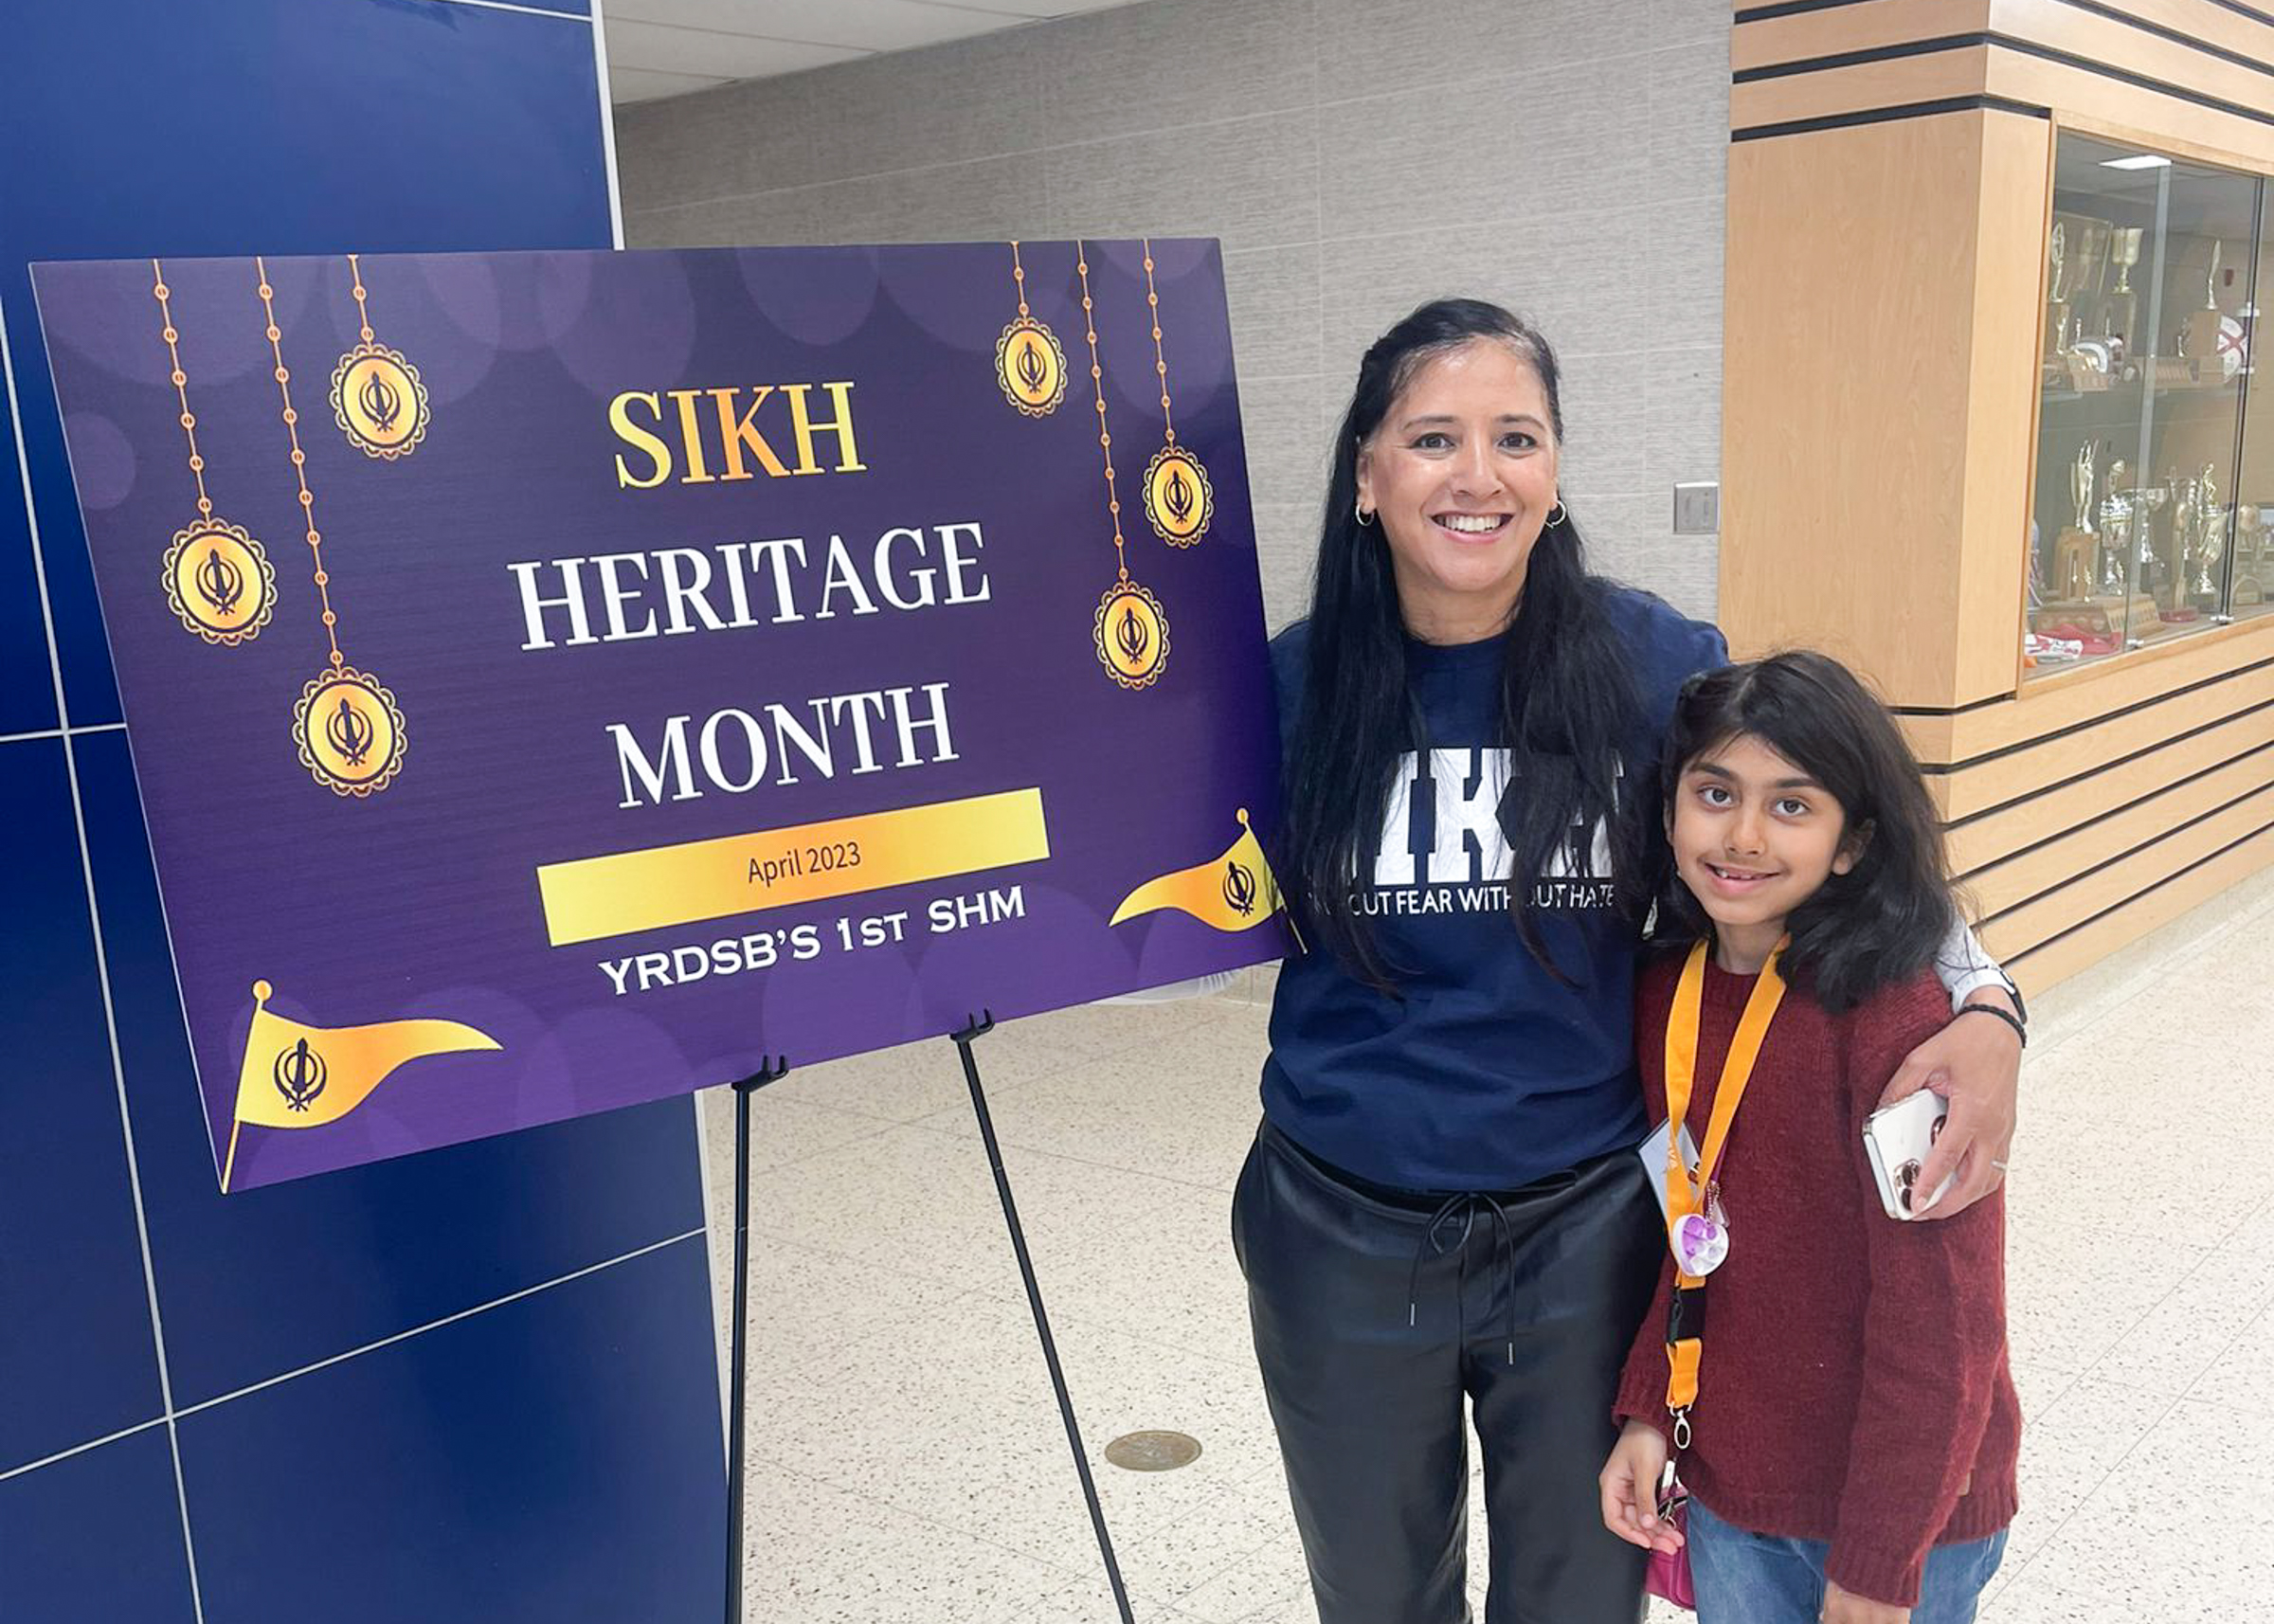 Young student and adult standing beside purple sign reading "Sikh Heritage Month"